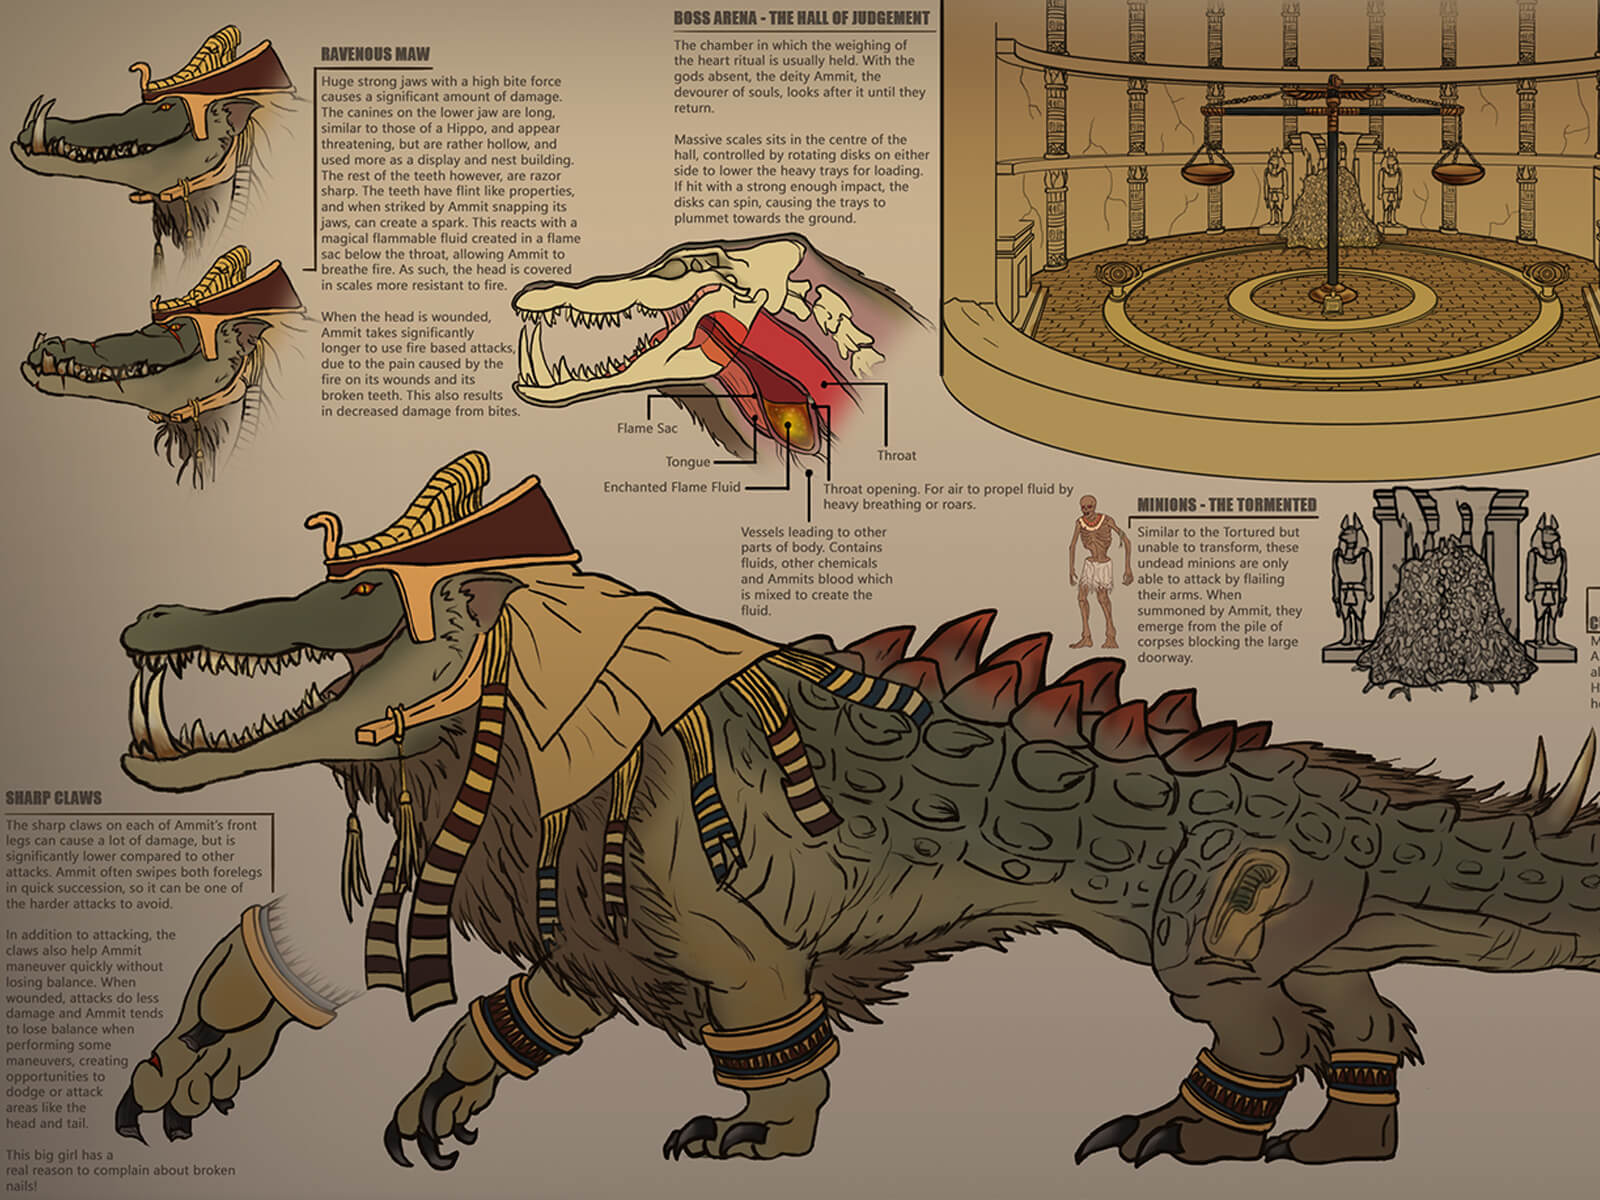 Details and sketches of a massive spiked, scaled, and furry alligator wearing ancient Egyptian-style headdress.